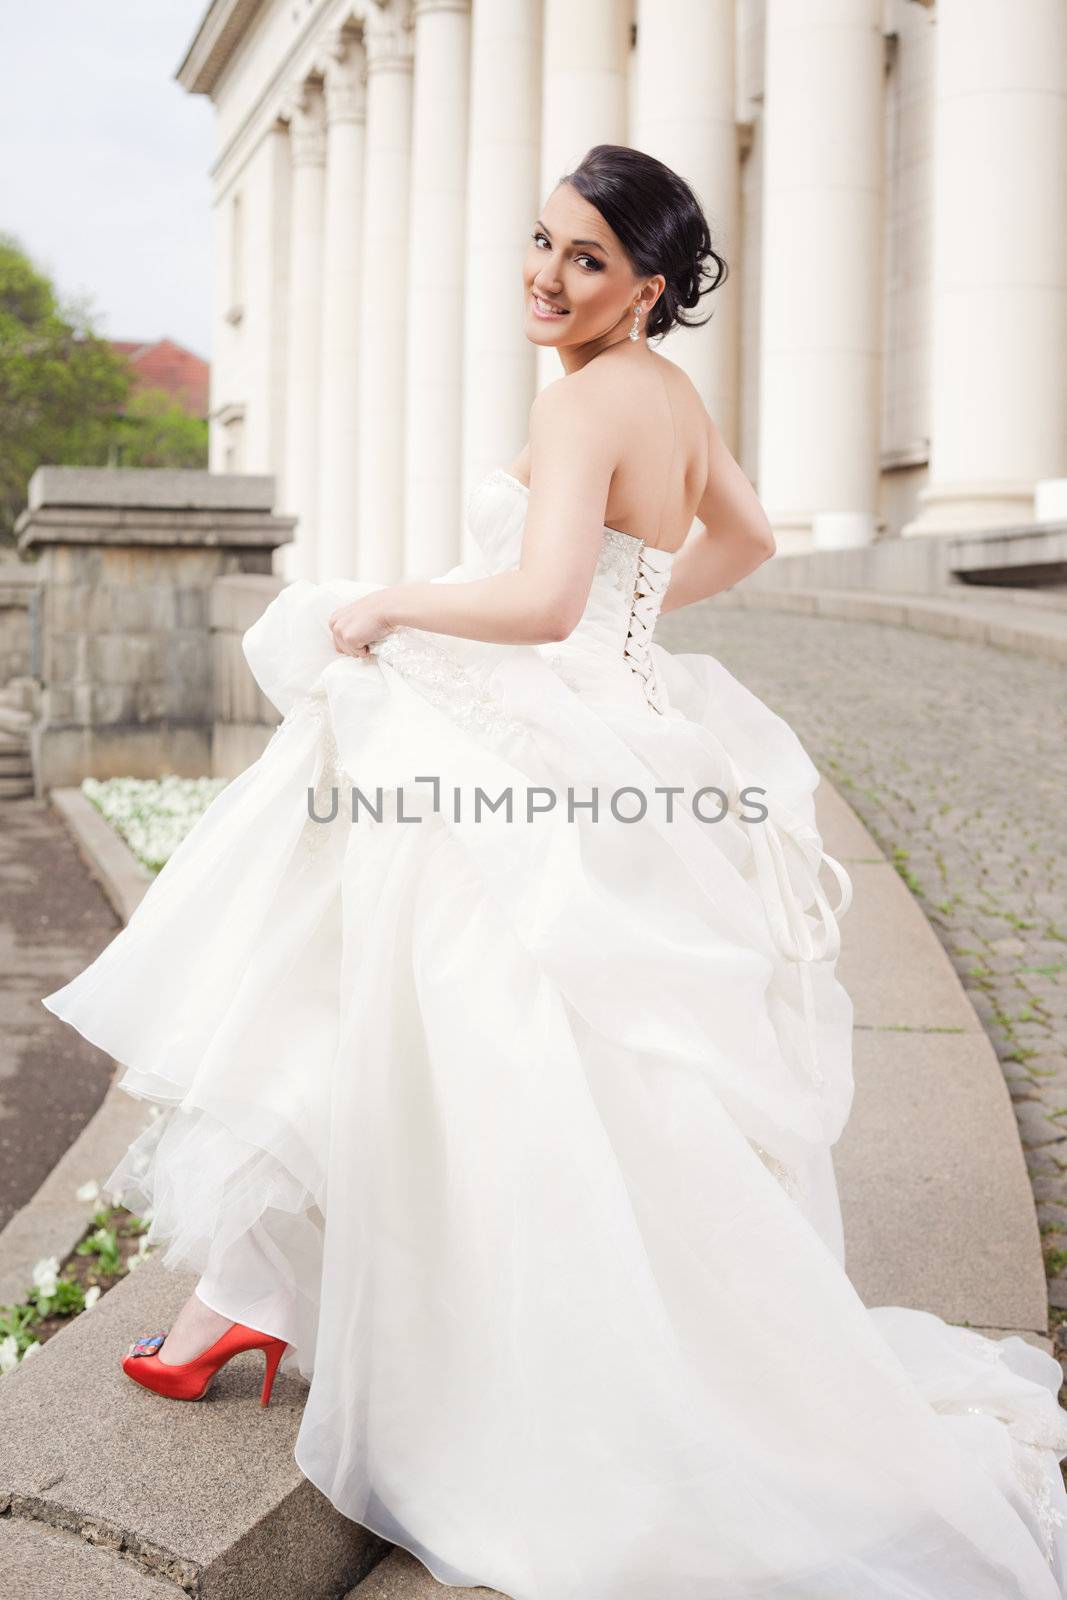 Beautiful bride standing with wedding dress smiling at camera